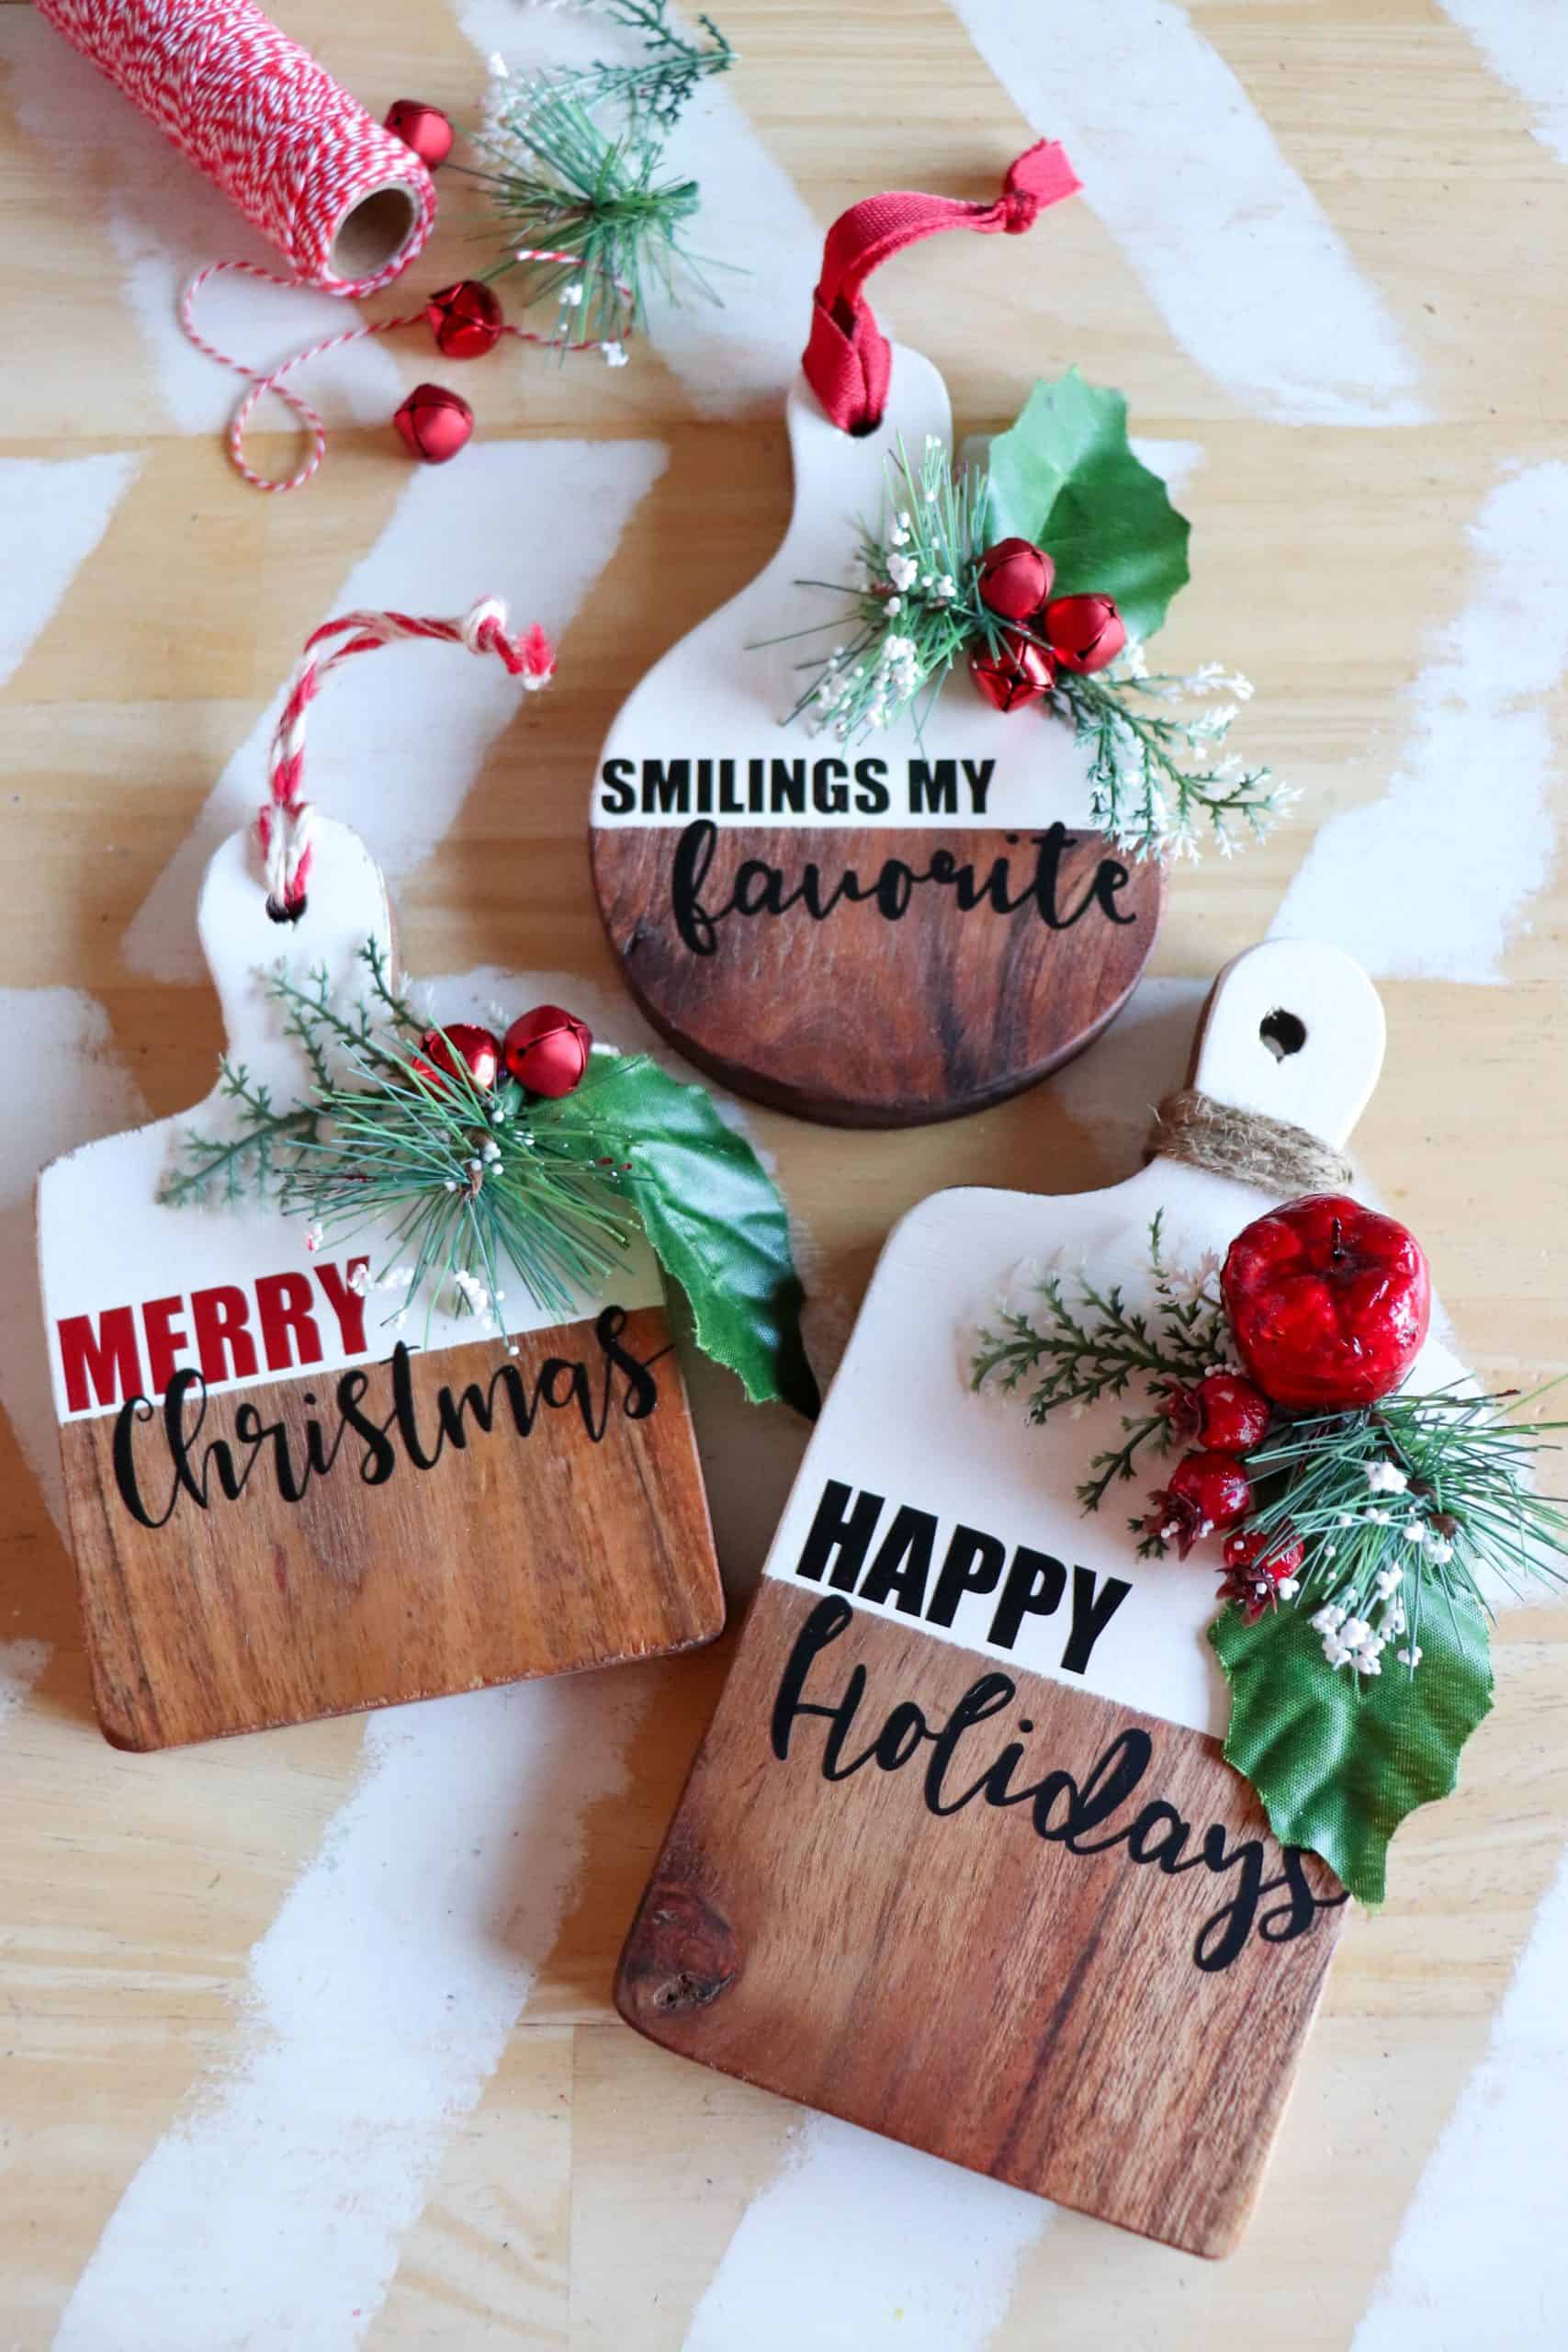 https://www.burlapandblue.com/wp-content/uploads/2021/07/holiday-wooden-cutting-board-sign-1-4-scaled-1.jpg